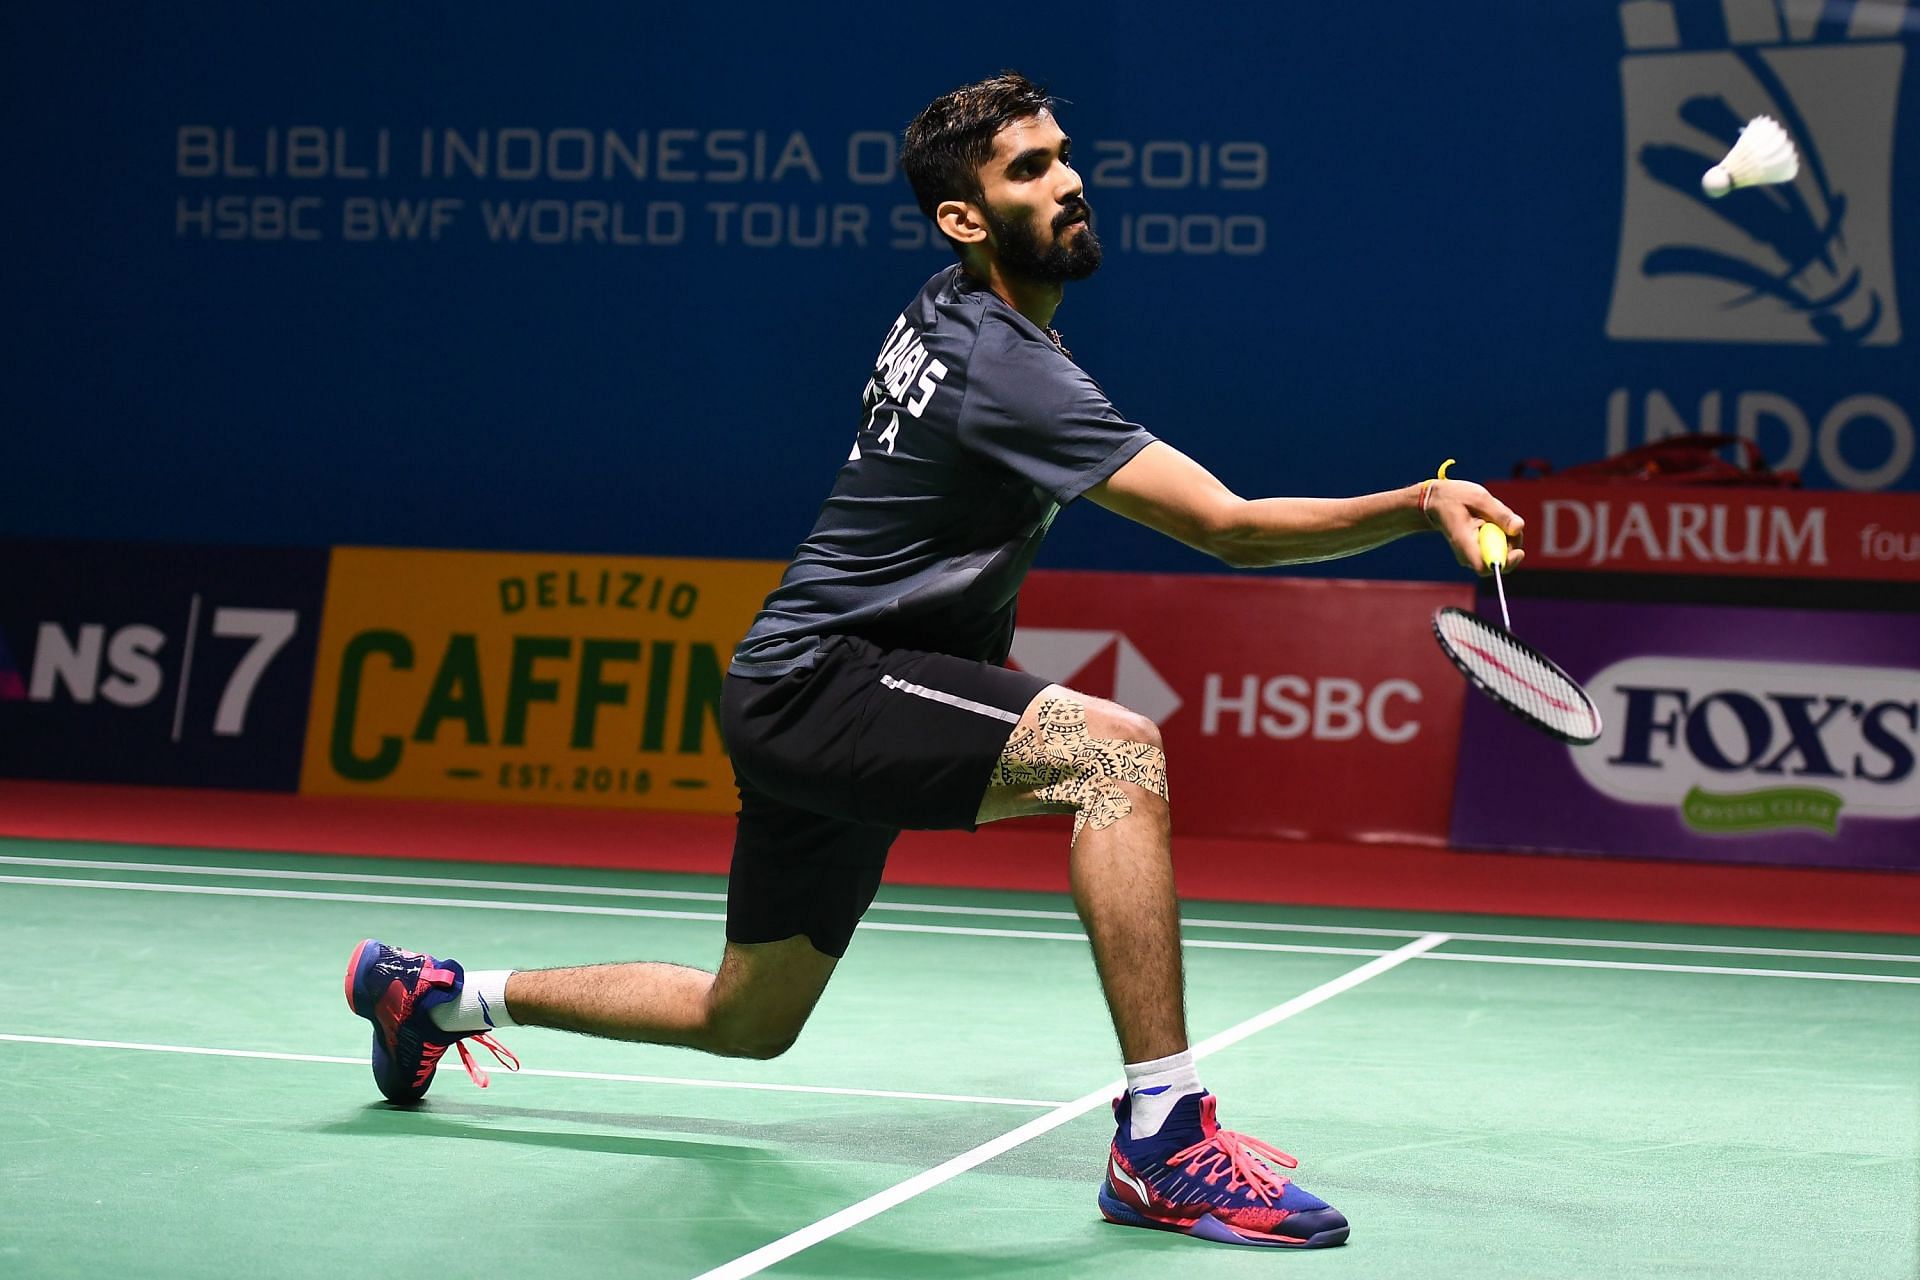 Can Kidambi Srikanth cause an upset at the French Open Badminton 2021?